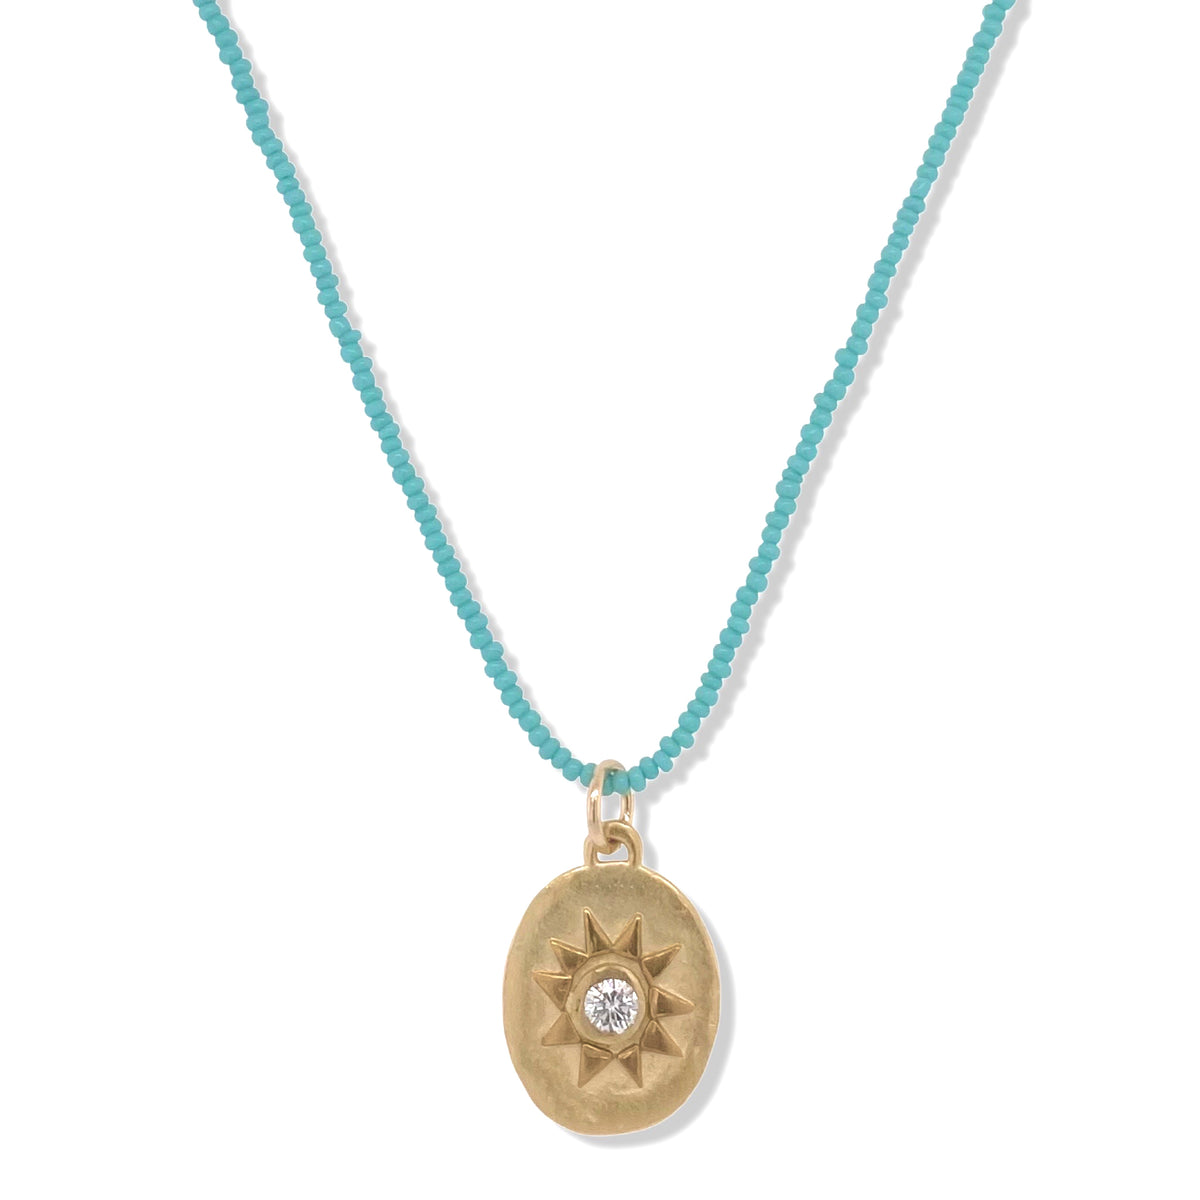 Selena Necklace in Gold on Turquoise beads | Keely Smith Jewelry | Nantucket